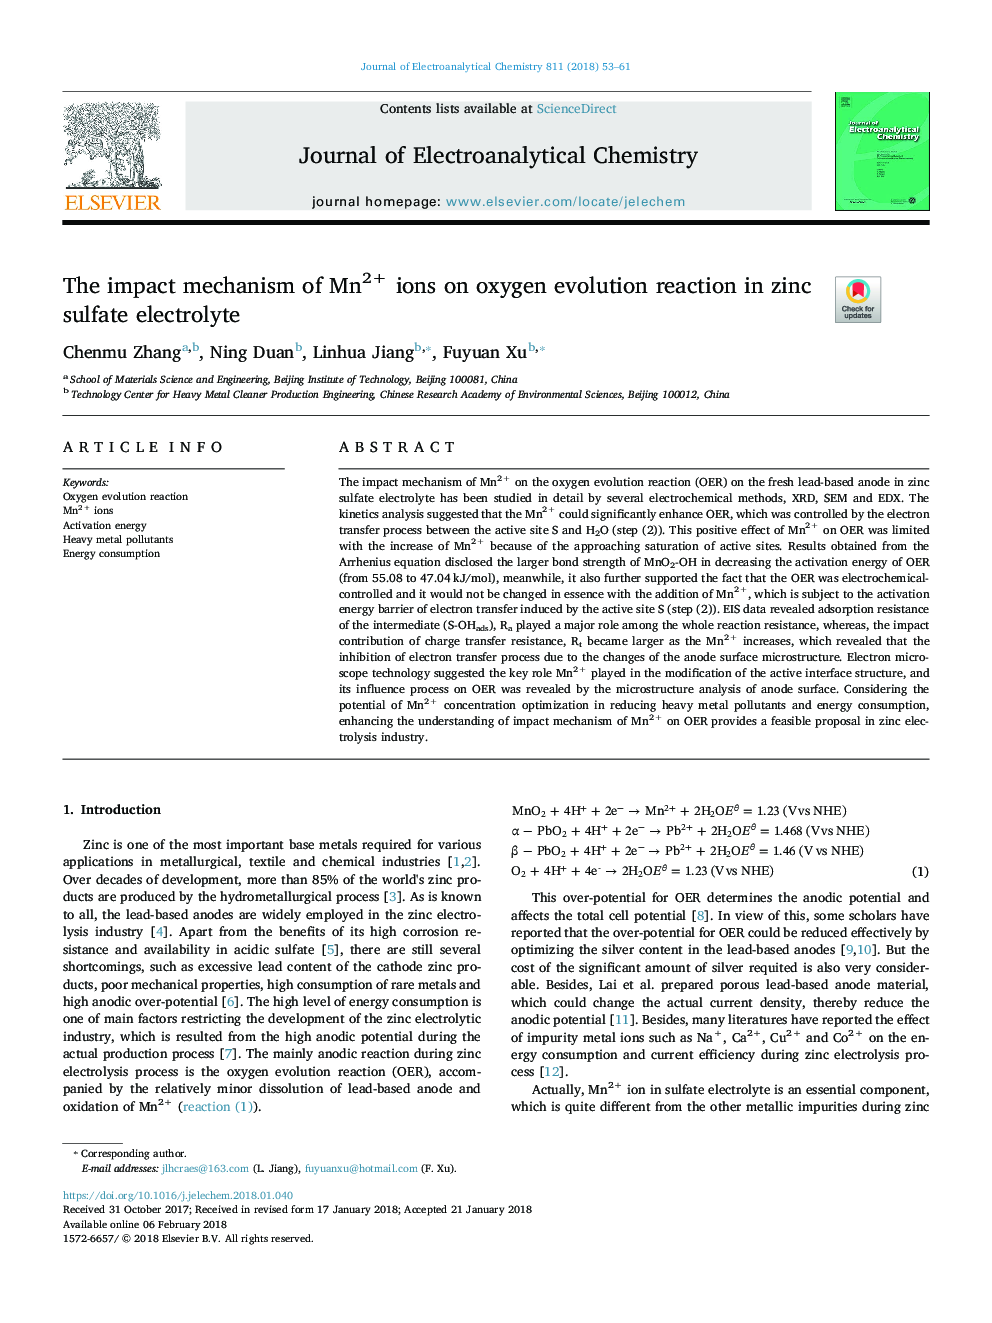 The impact mechanism of Mn2+ ions on oxygen evolution reaction in zinc sulfate electrolyte